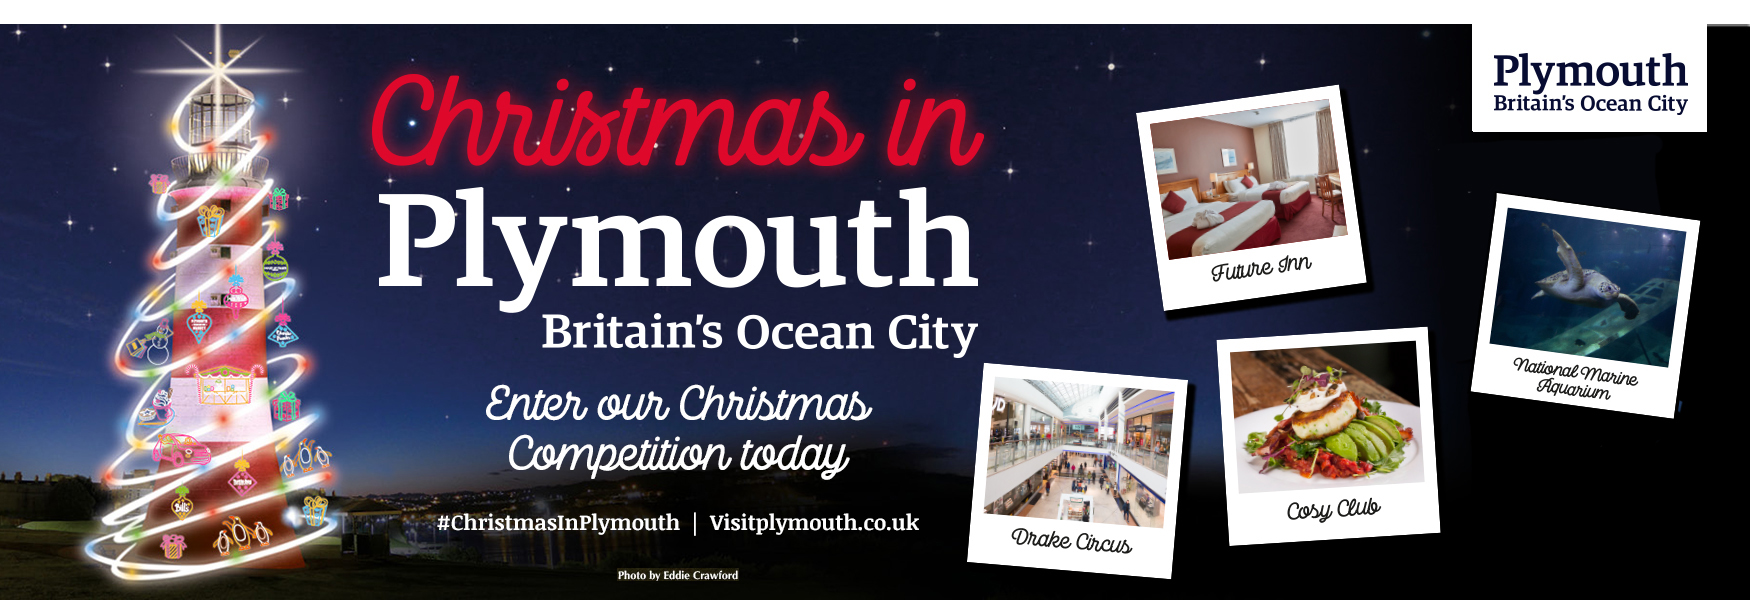 Christmas In Plymouth: Win a Family Break with Visit Plymouth   Plymouth is the perfect place to visit for a family break this Christmas. With a whole host of all-weather attractions, exciting local events, Christmas markets and shopping experiences, stunning outdoor spaces and the waterfront, there is something for family members of all ages to enjoy!